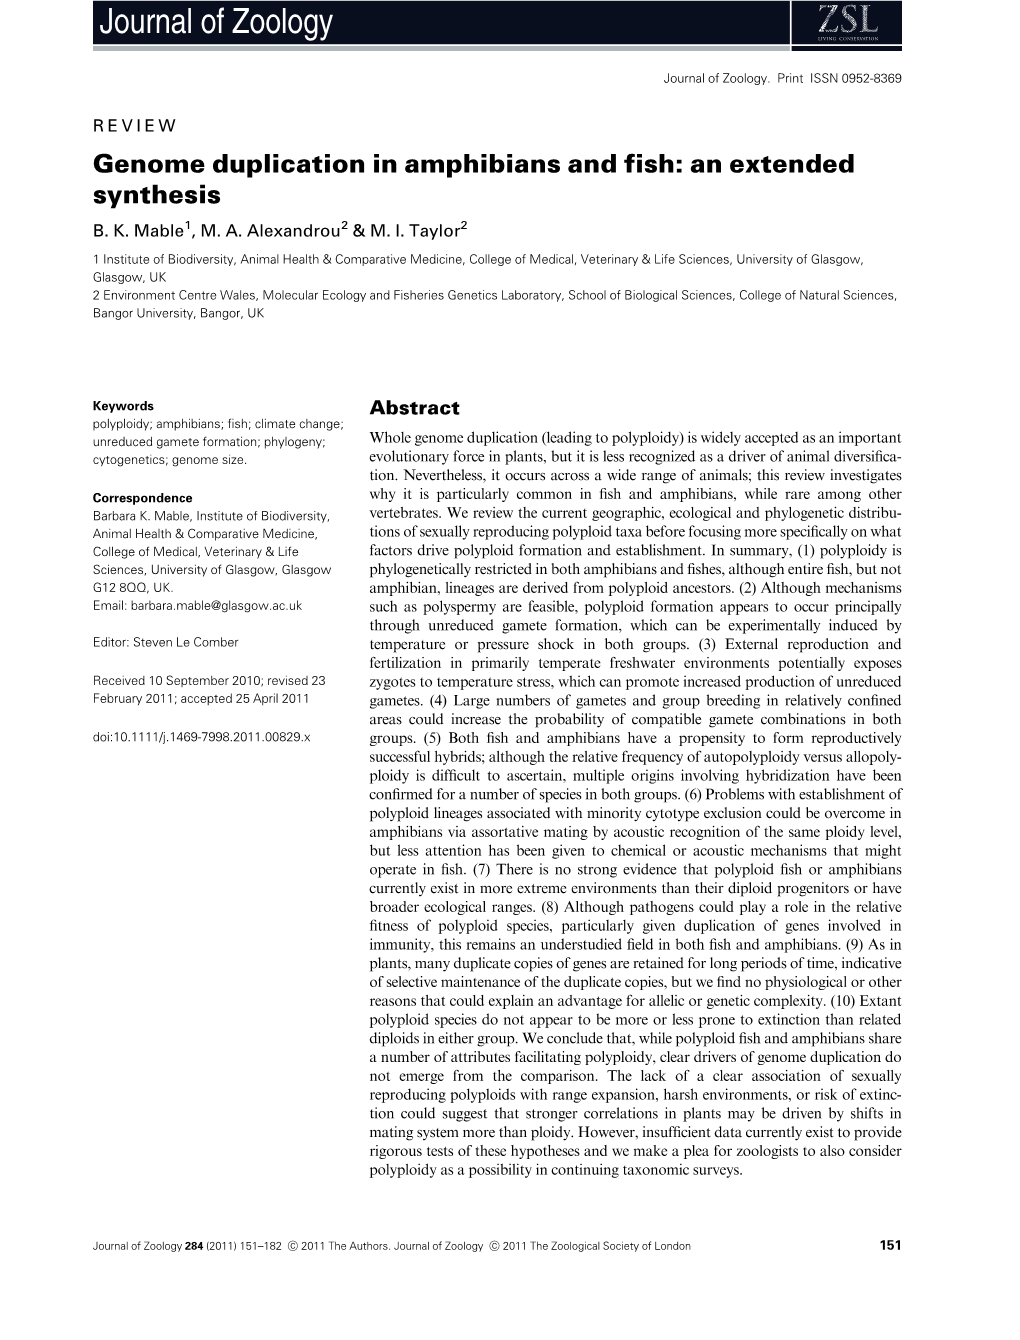 Genome Duplication in Amphibians and Fish: an Extended Synthesis B